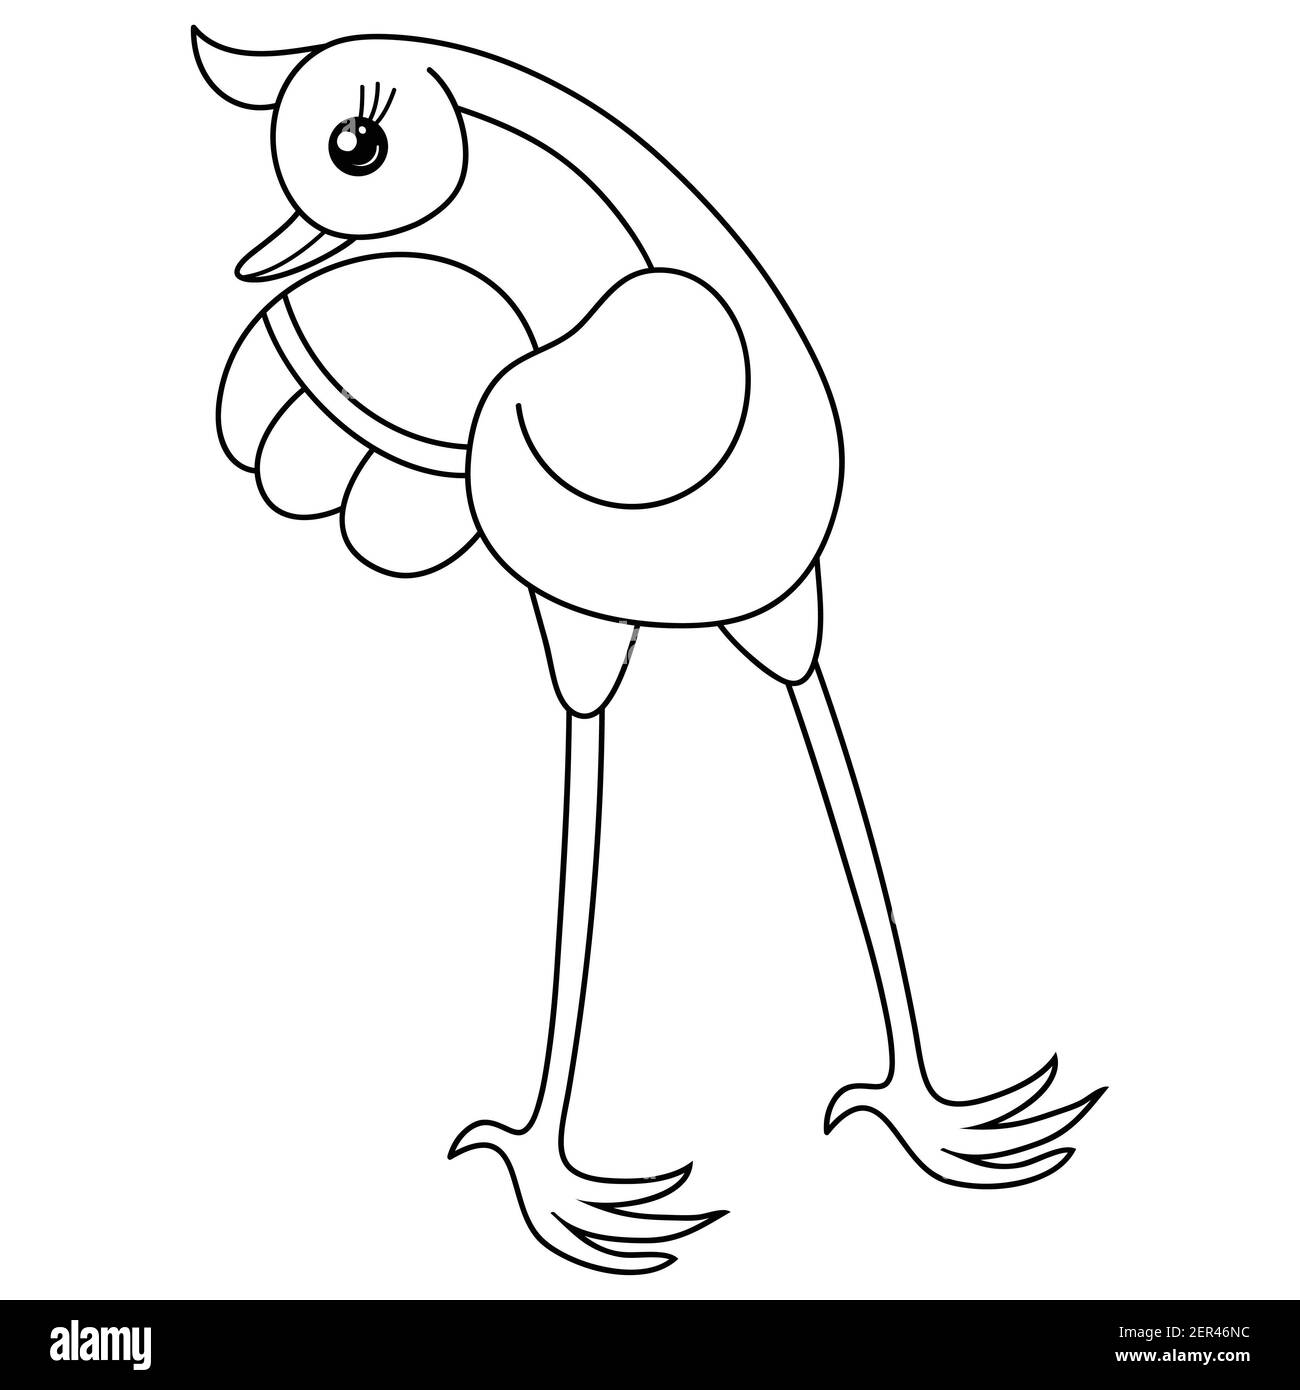 A cute cartoon bird image for relaxing  art style illustration  for print Stock Photo - Alamy